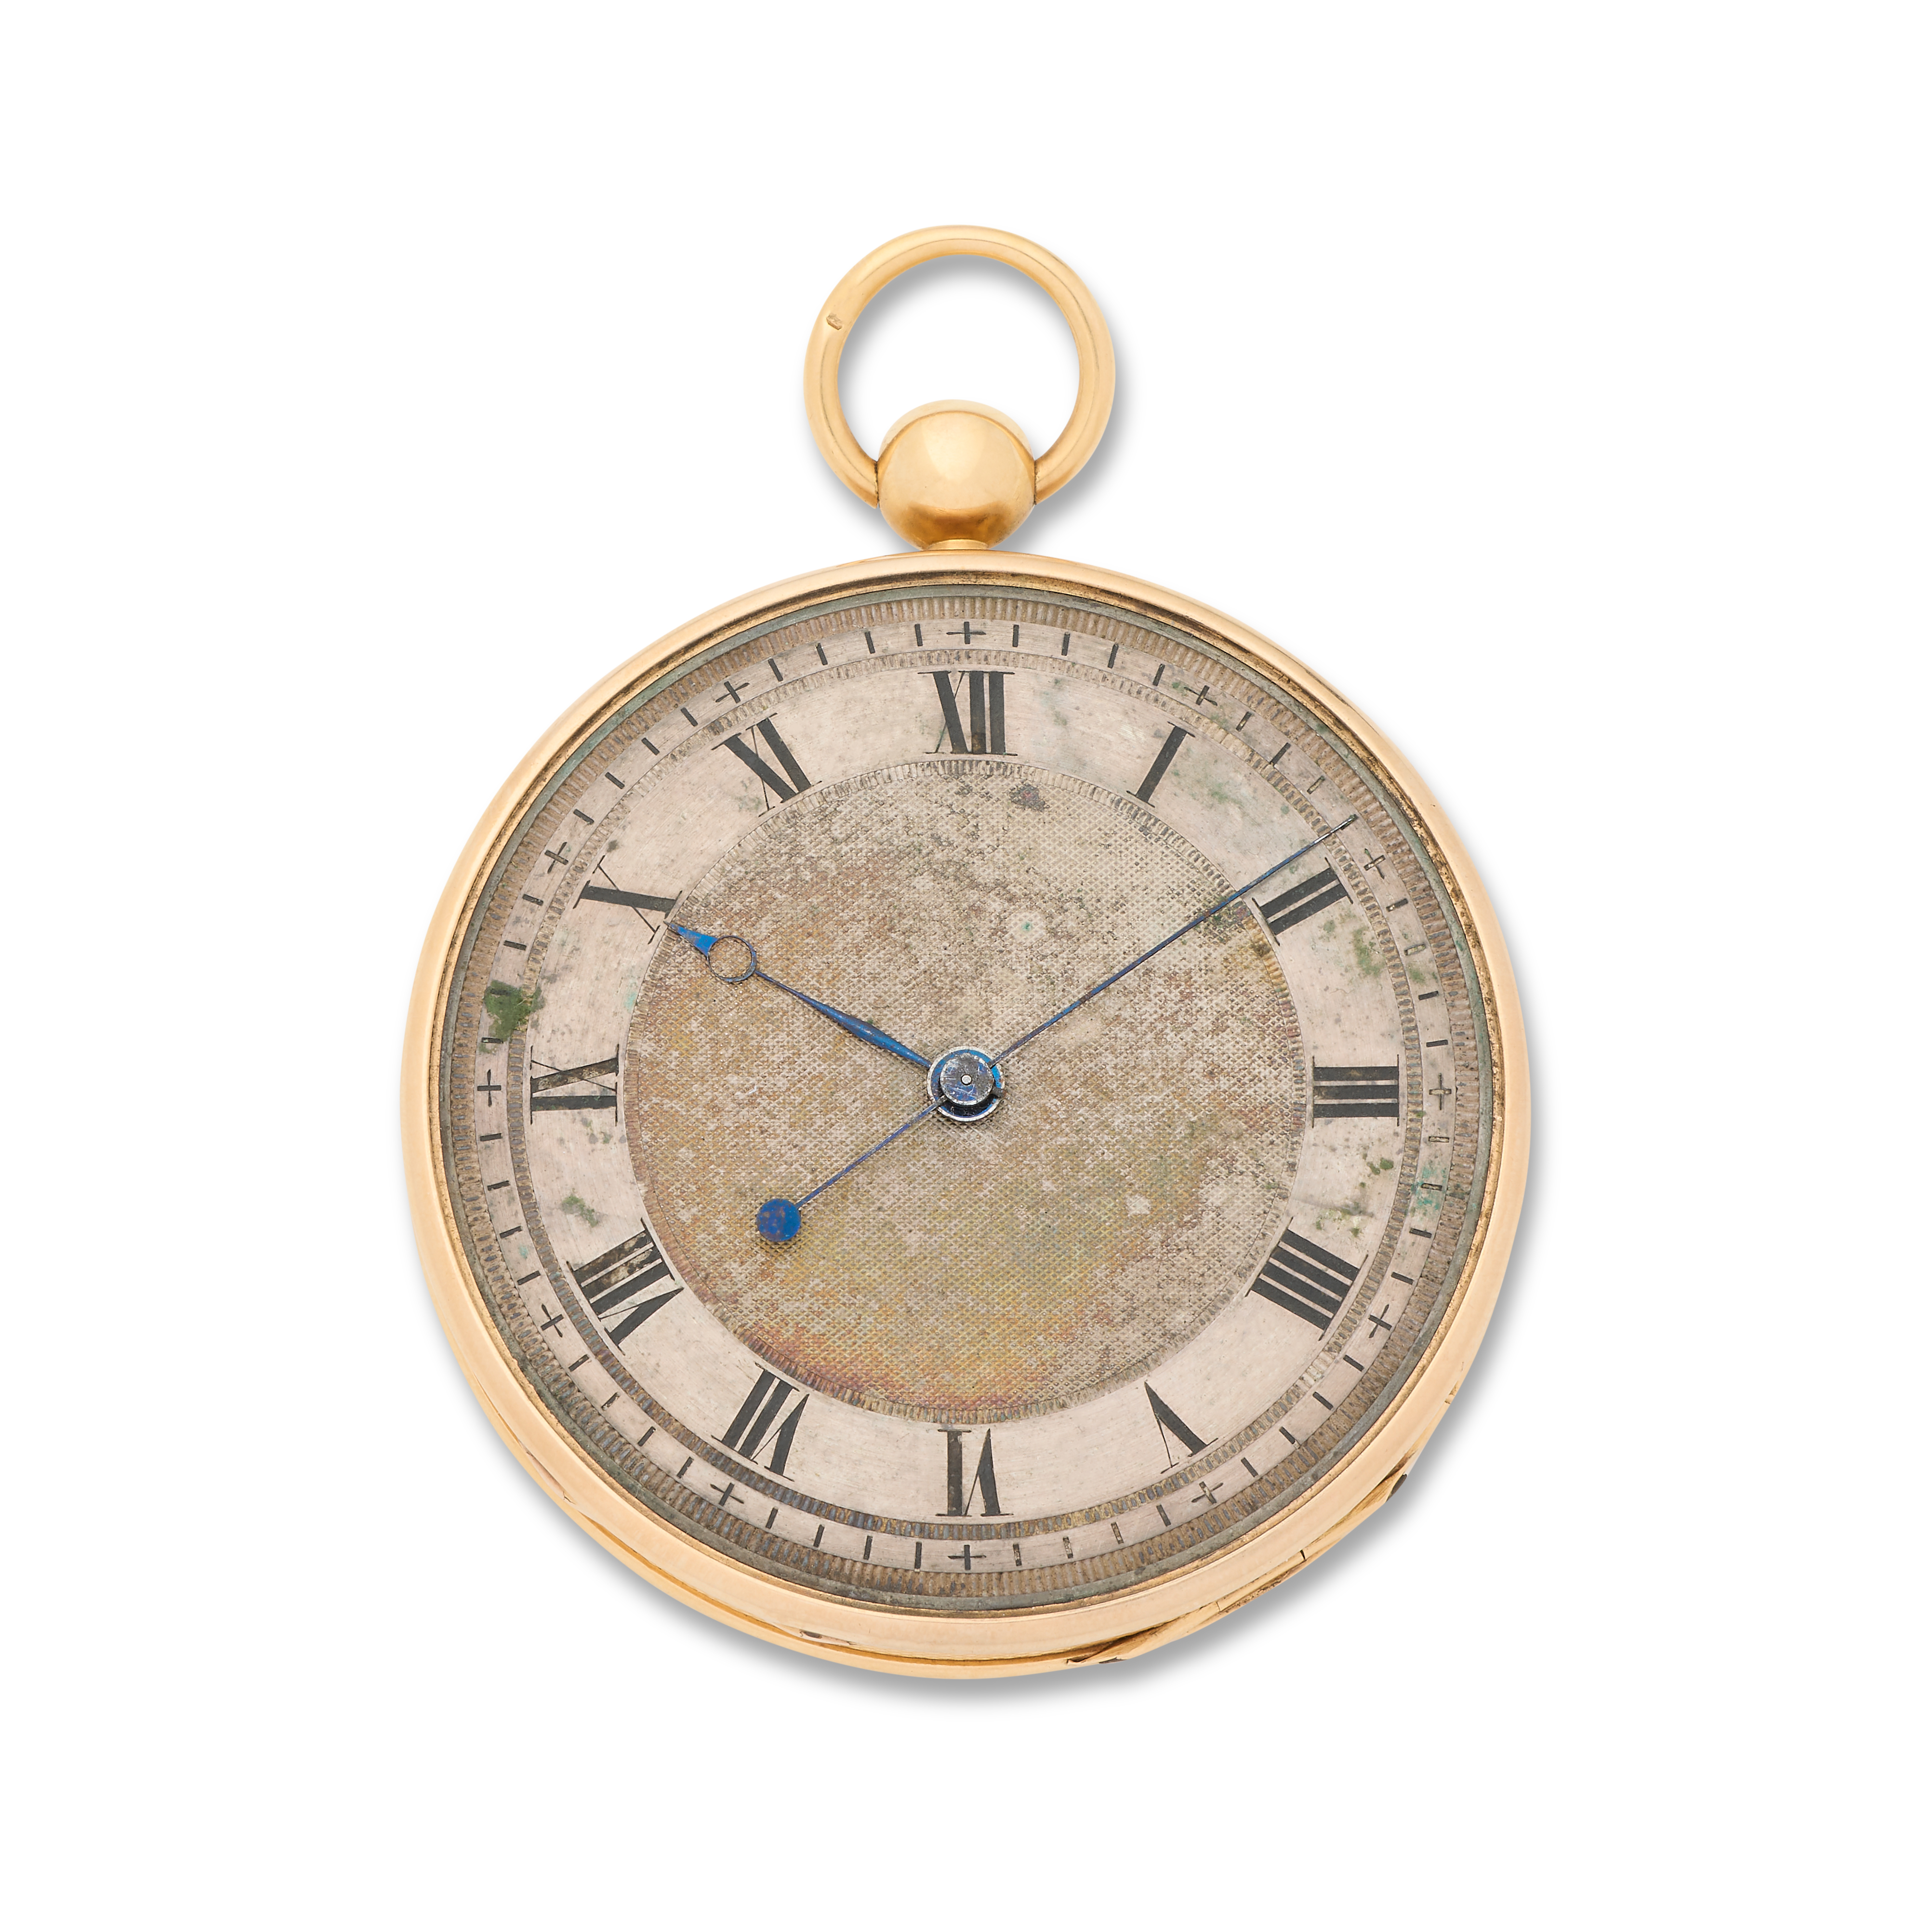 Vaucher Fr&#232;res. An unusual continental gold key wind open face pocket watch with independen...